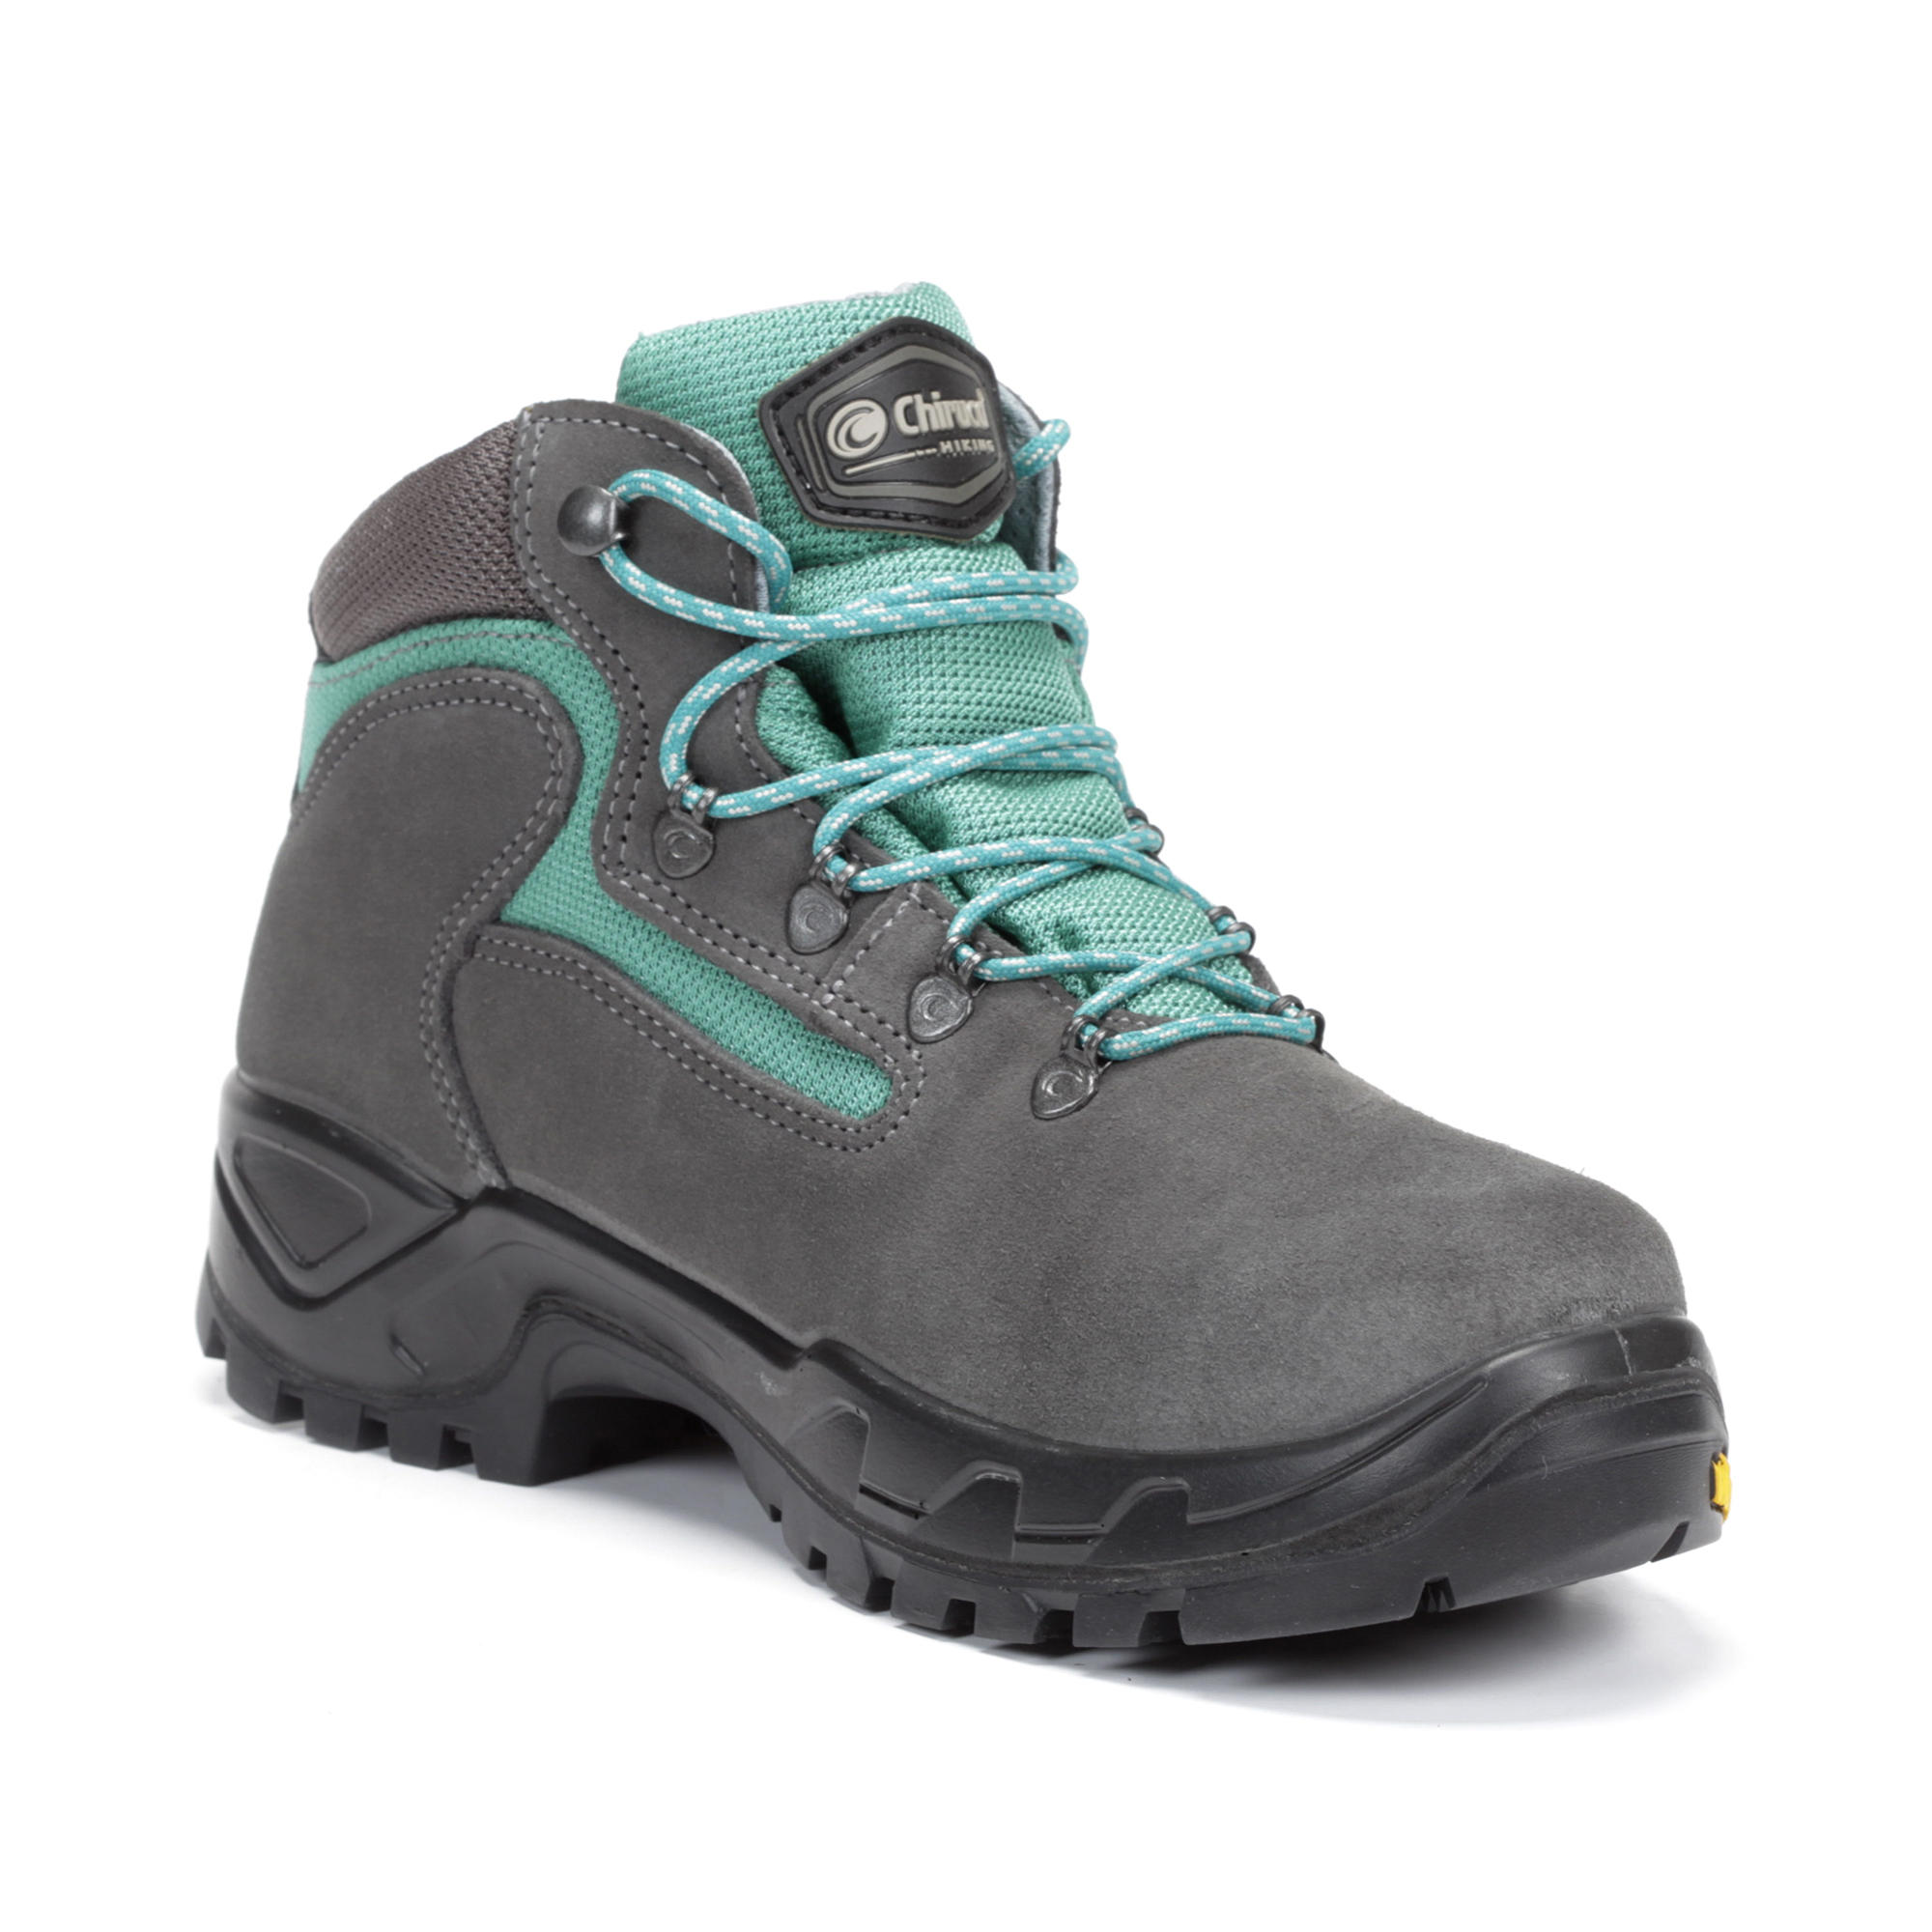 Botas impermeables mujer con Gore-Tex